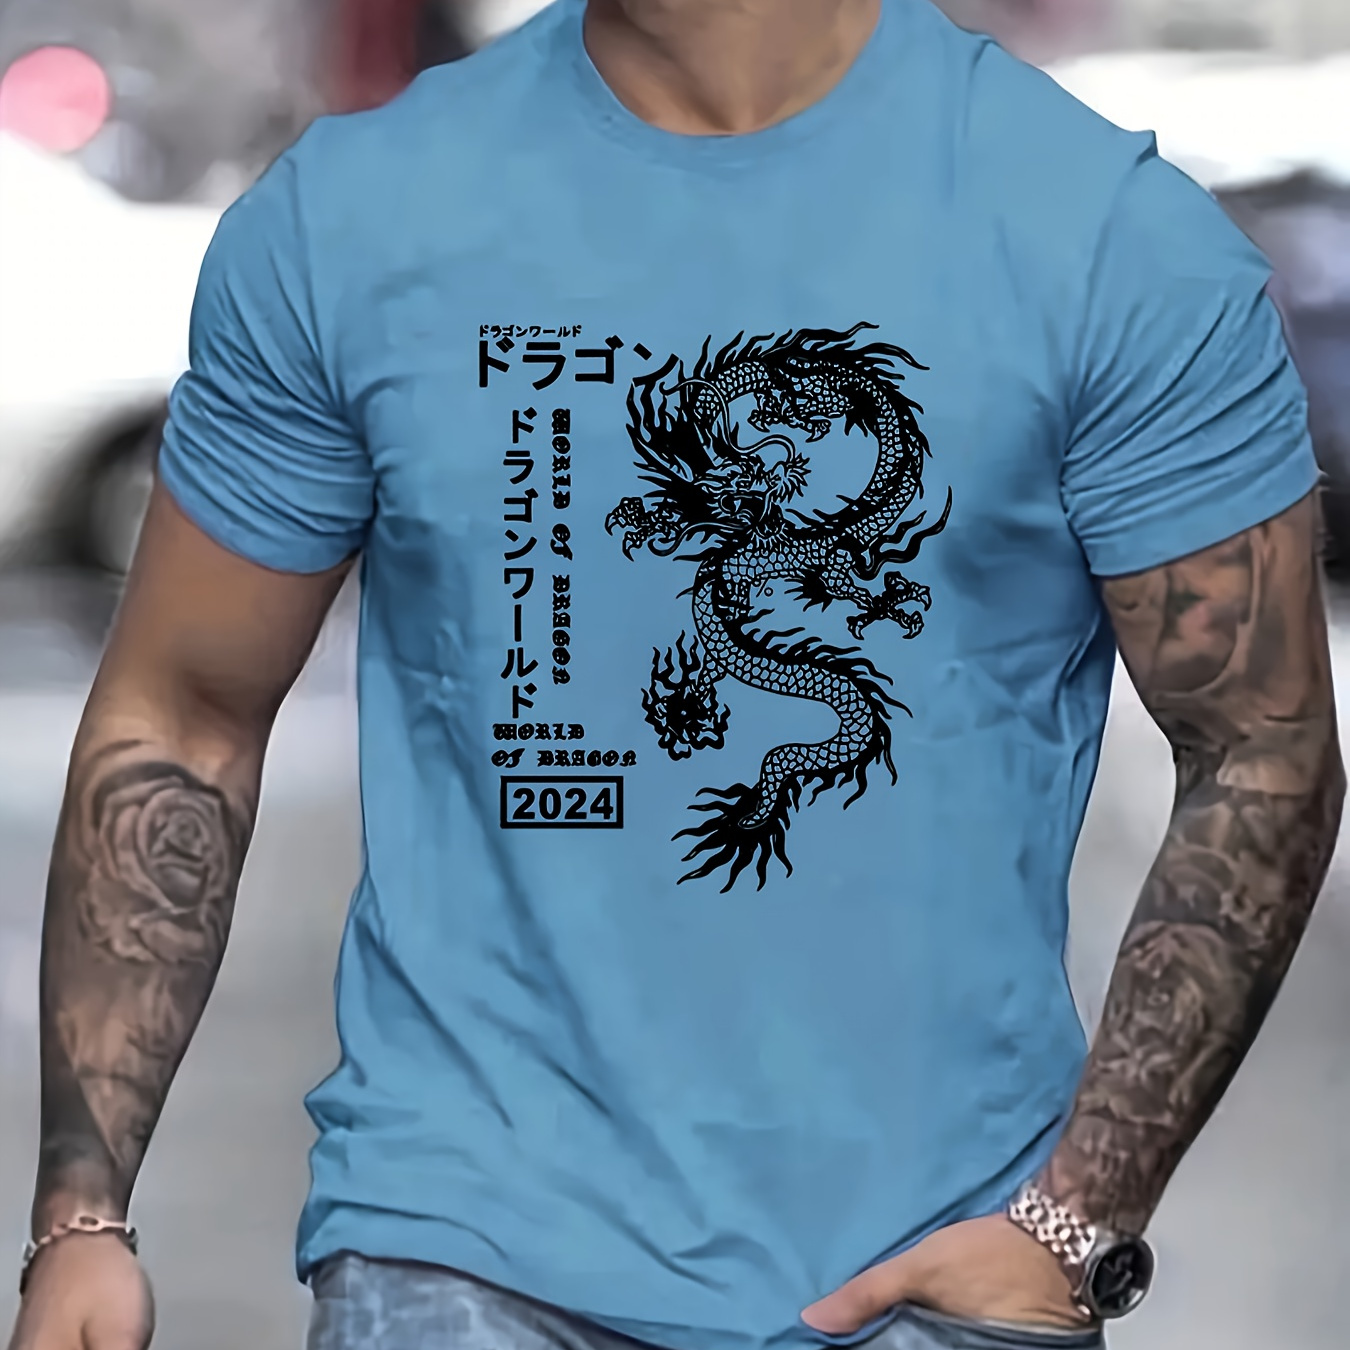 

Dragon And Japanese Characters Print T Shirt, Tees For Men, Casual Short Sleeve T-shirt For Summer